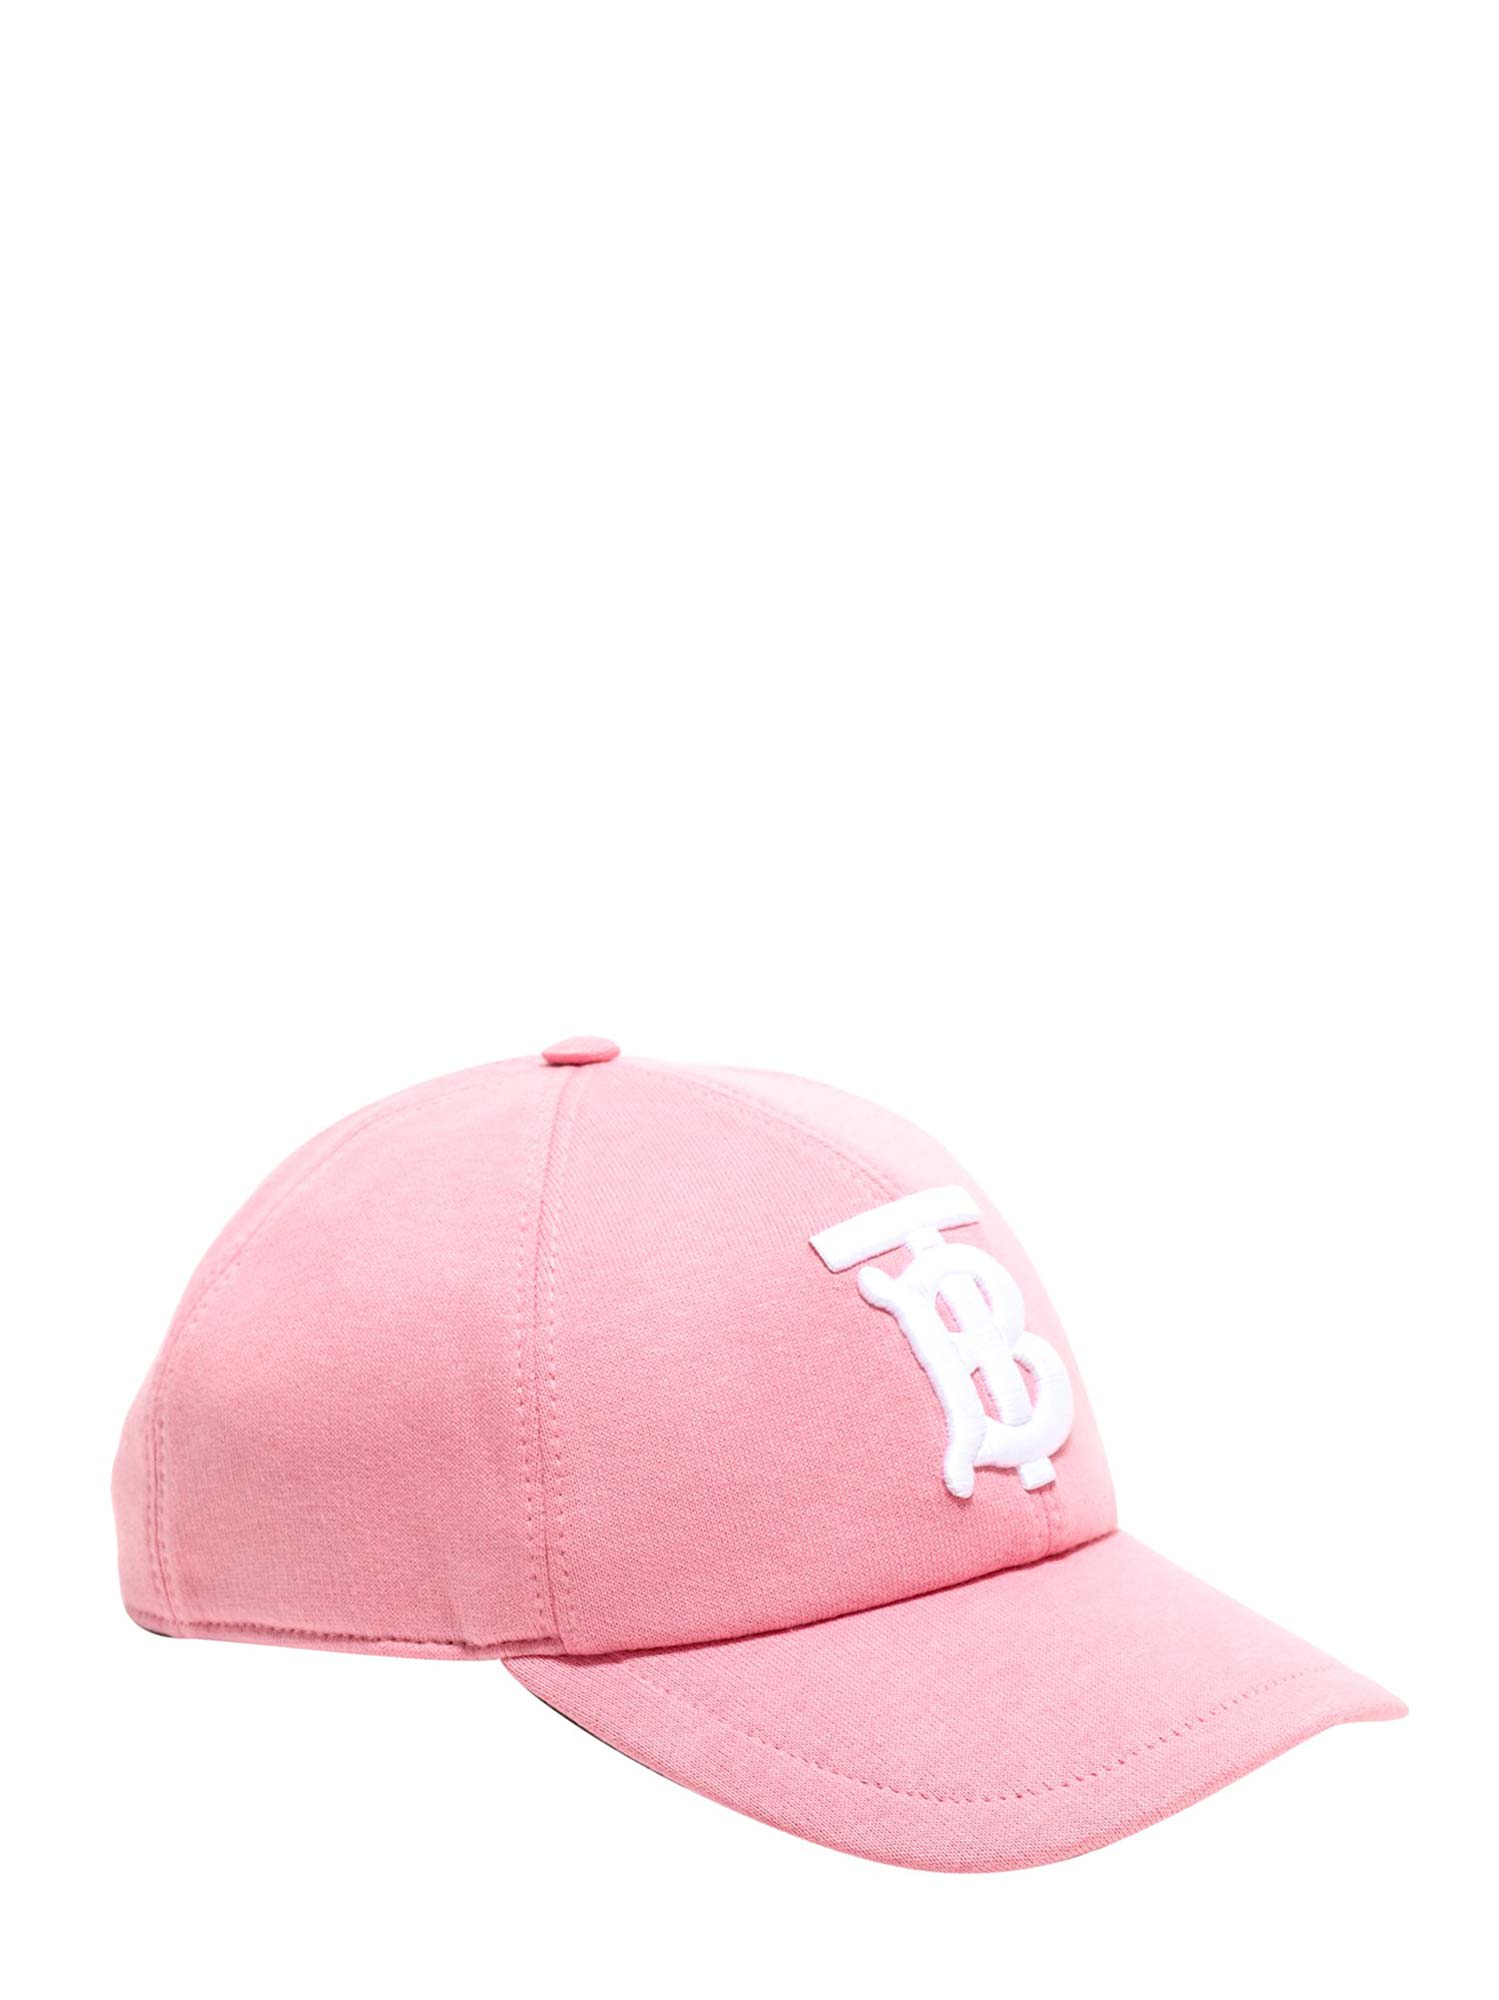 pink burberry hat